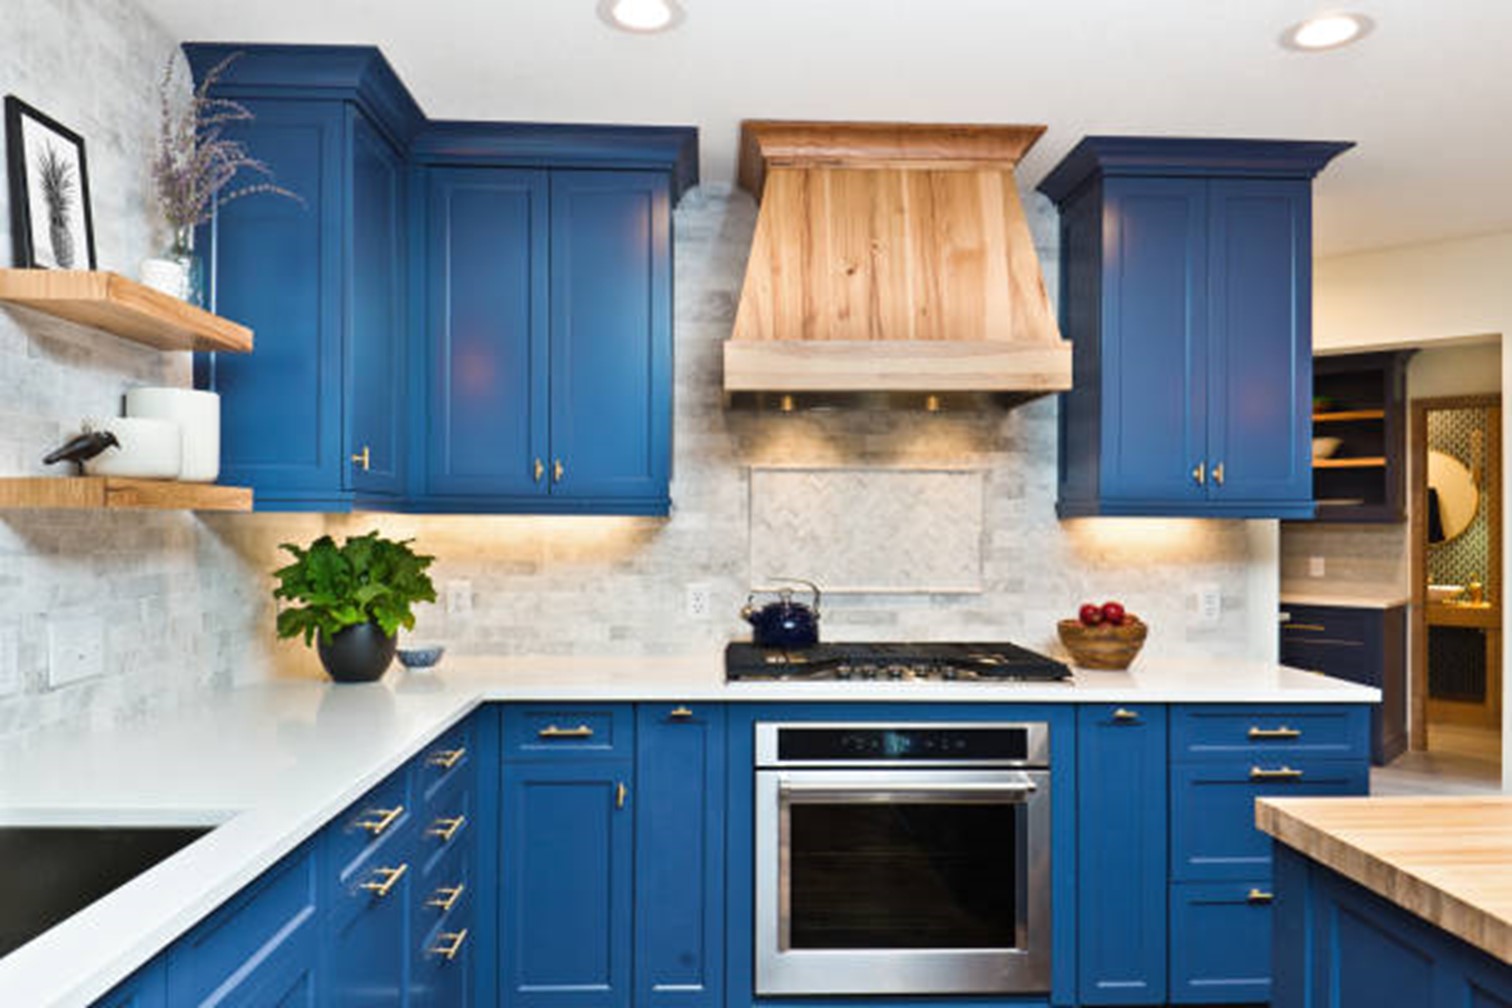 Do You Need a Customer Cabinet Makers?